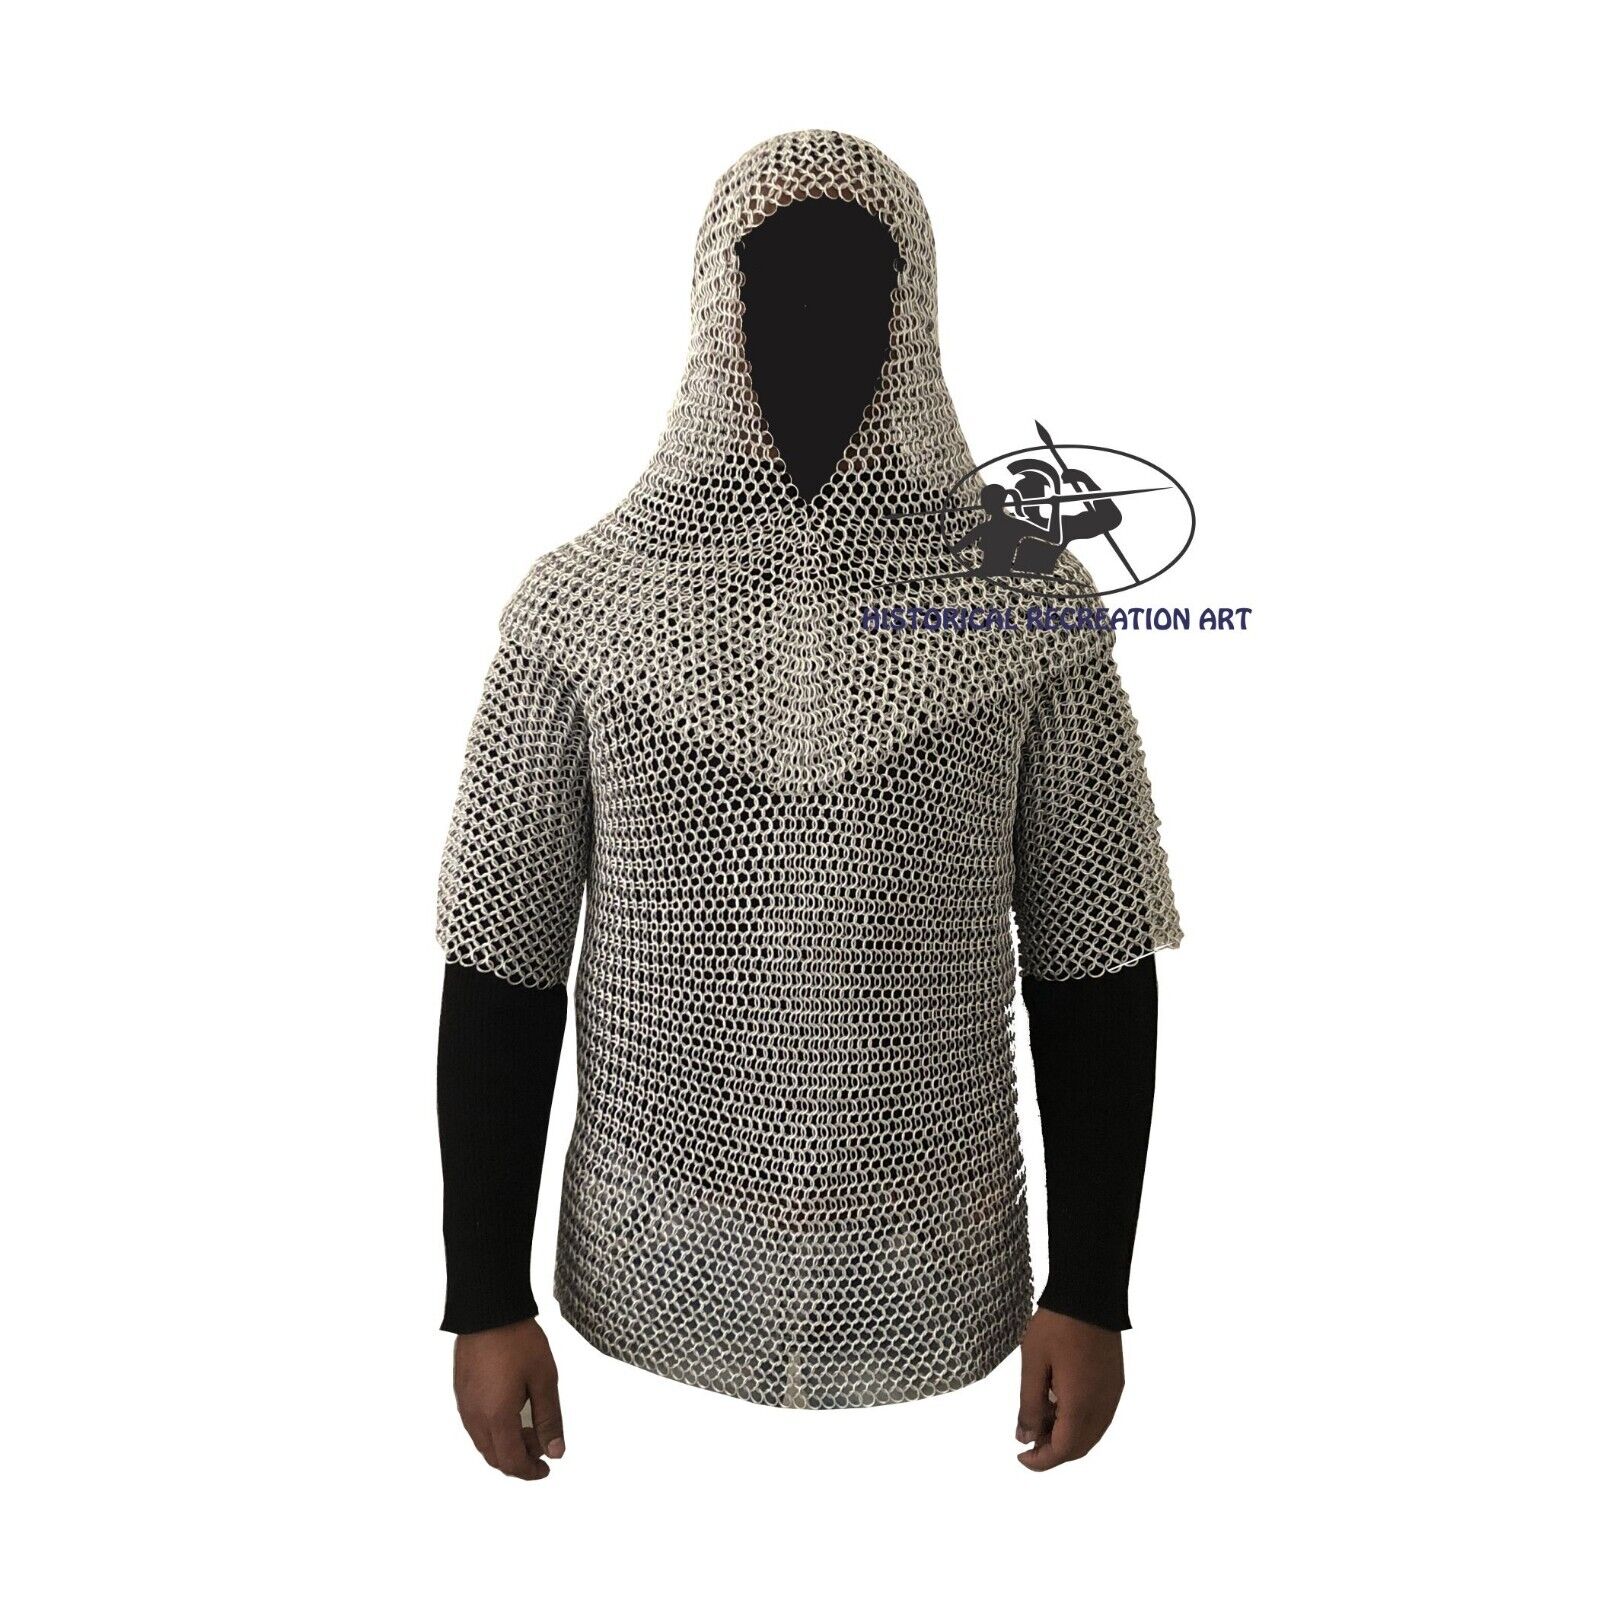 Aluminium Butted Chainmail Haubergeon with Coif | ID - 9 & 10 MM |